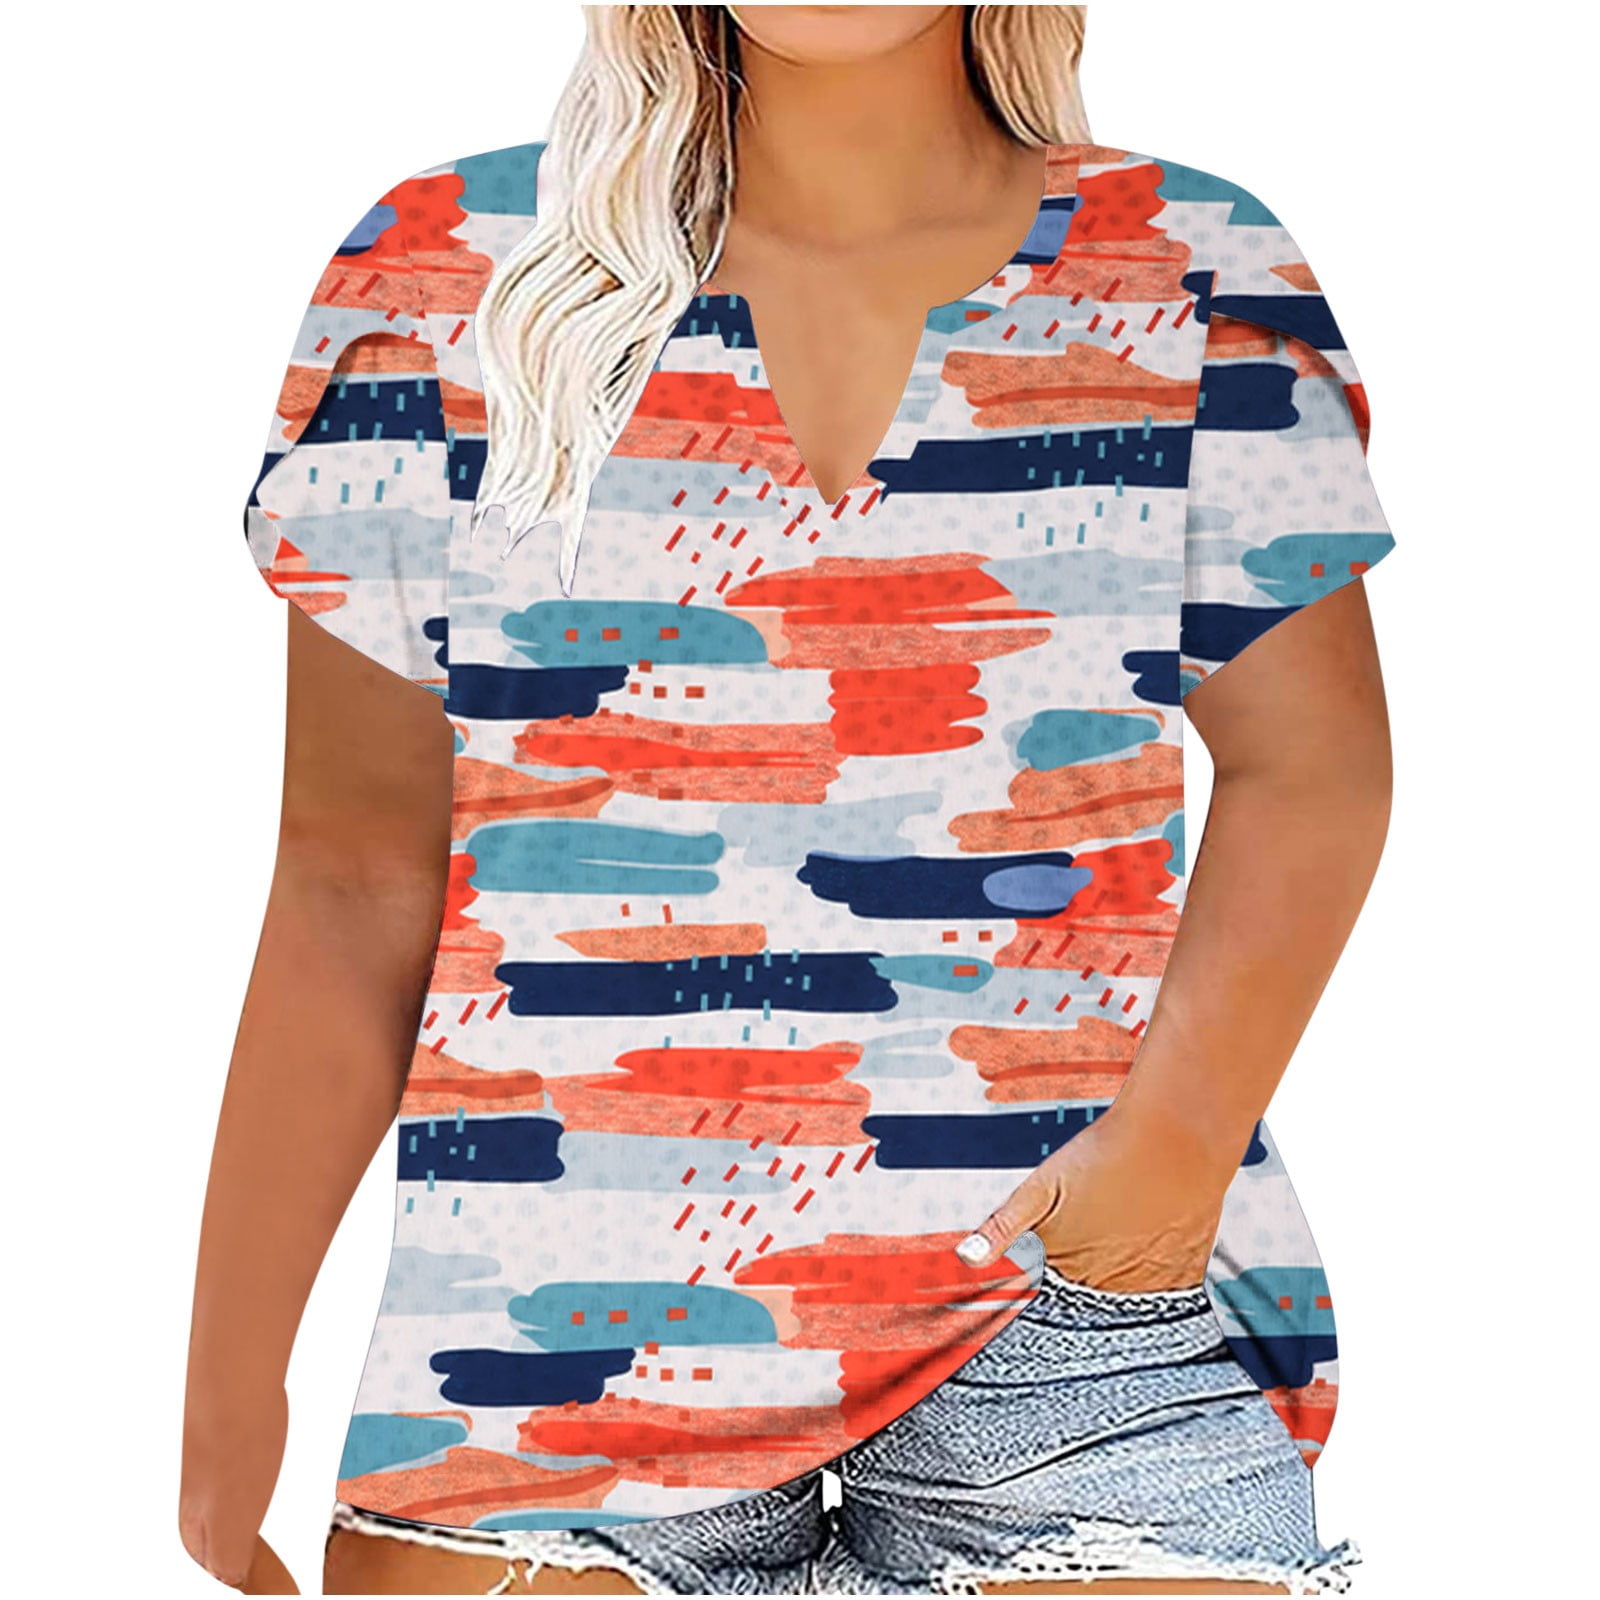 OVBMPZD Women Fashion Casual Printed Shirts Short Sleeve Loose Tee Tops ...